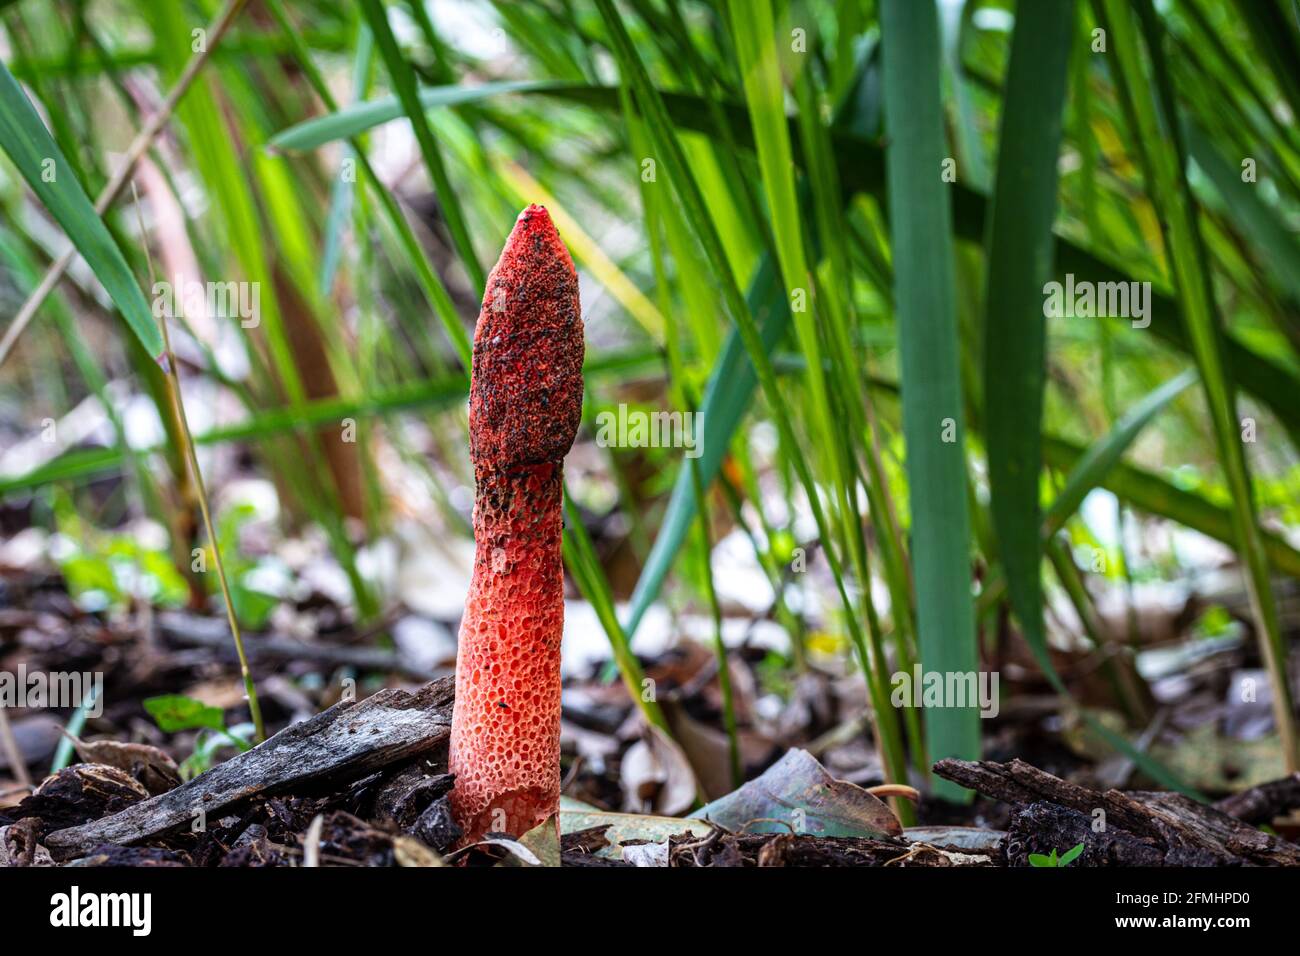 Phallus rubicundus, red stinkhorn fungi found in leaf litter in woodland New South Wales Australia Stock Photo